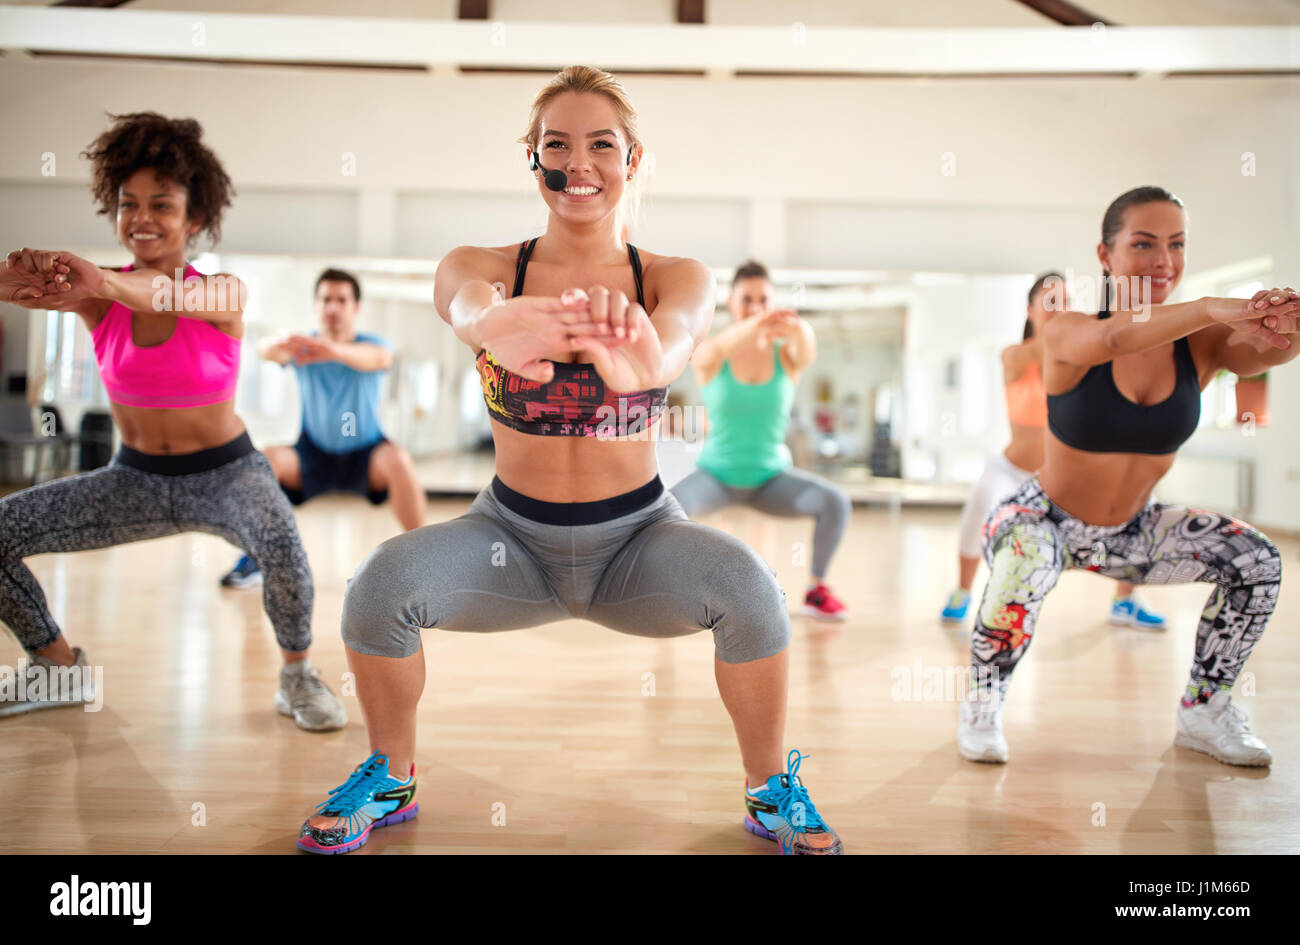 Smiling blond female trainer with headset doing squats with fitness group indoor Stock Photo